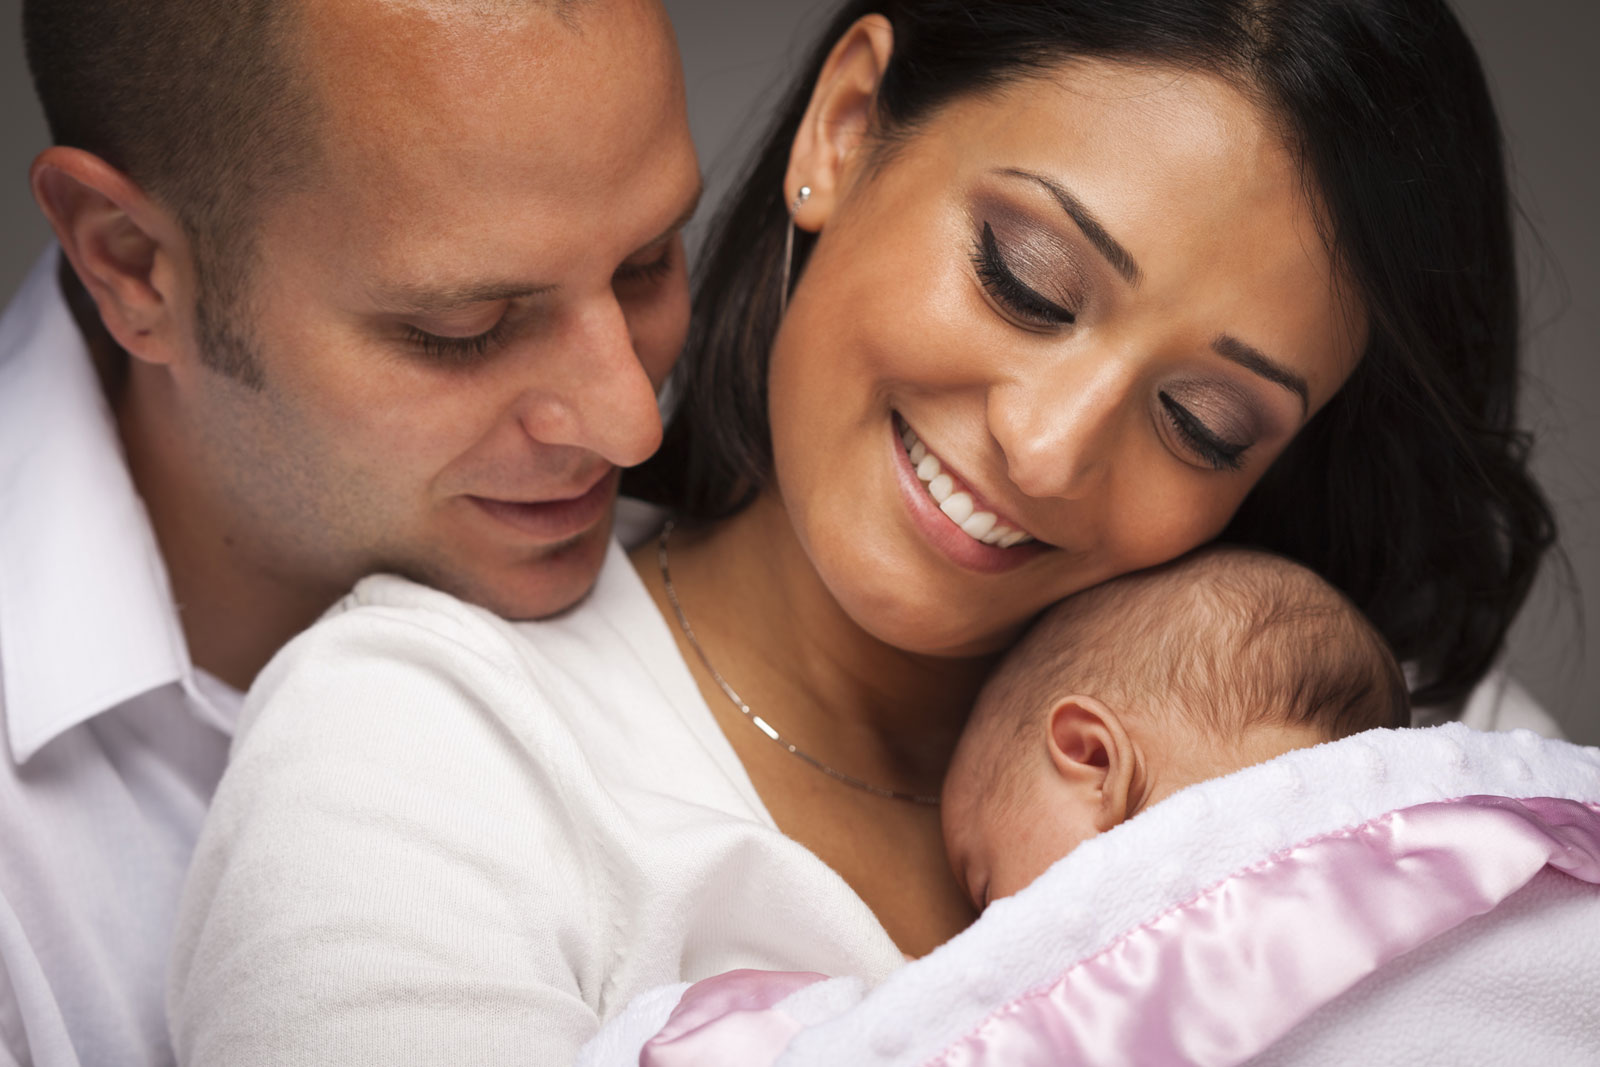 Patient Advantage helps patients pay for Infertility Treatment through a variety of lending programs.